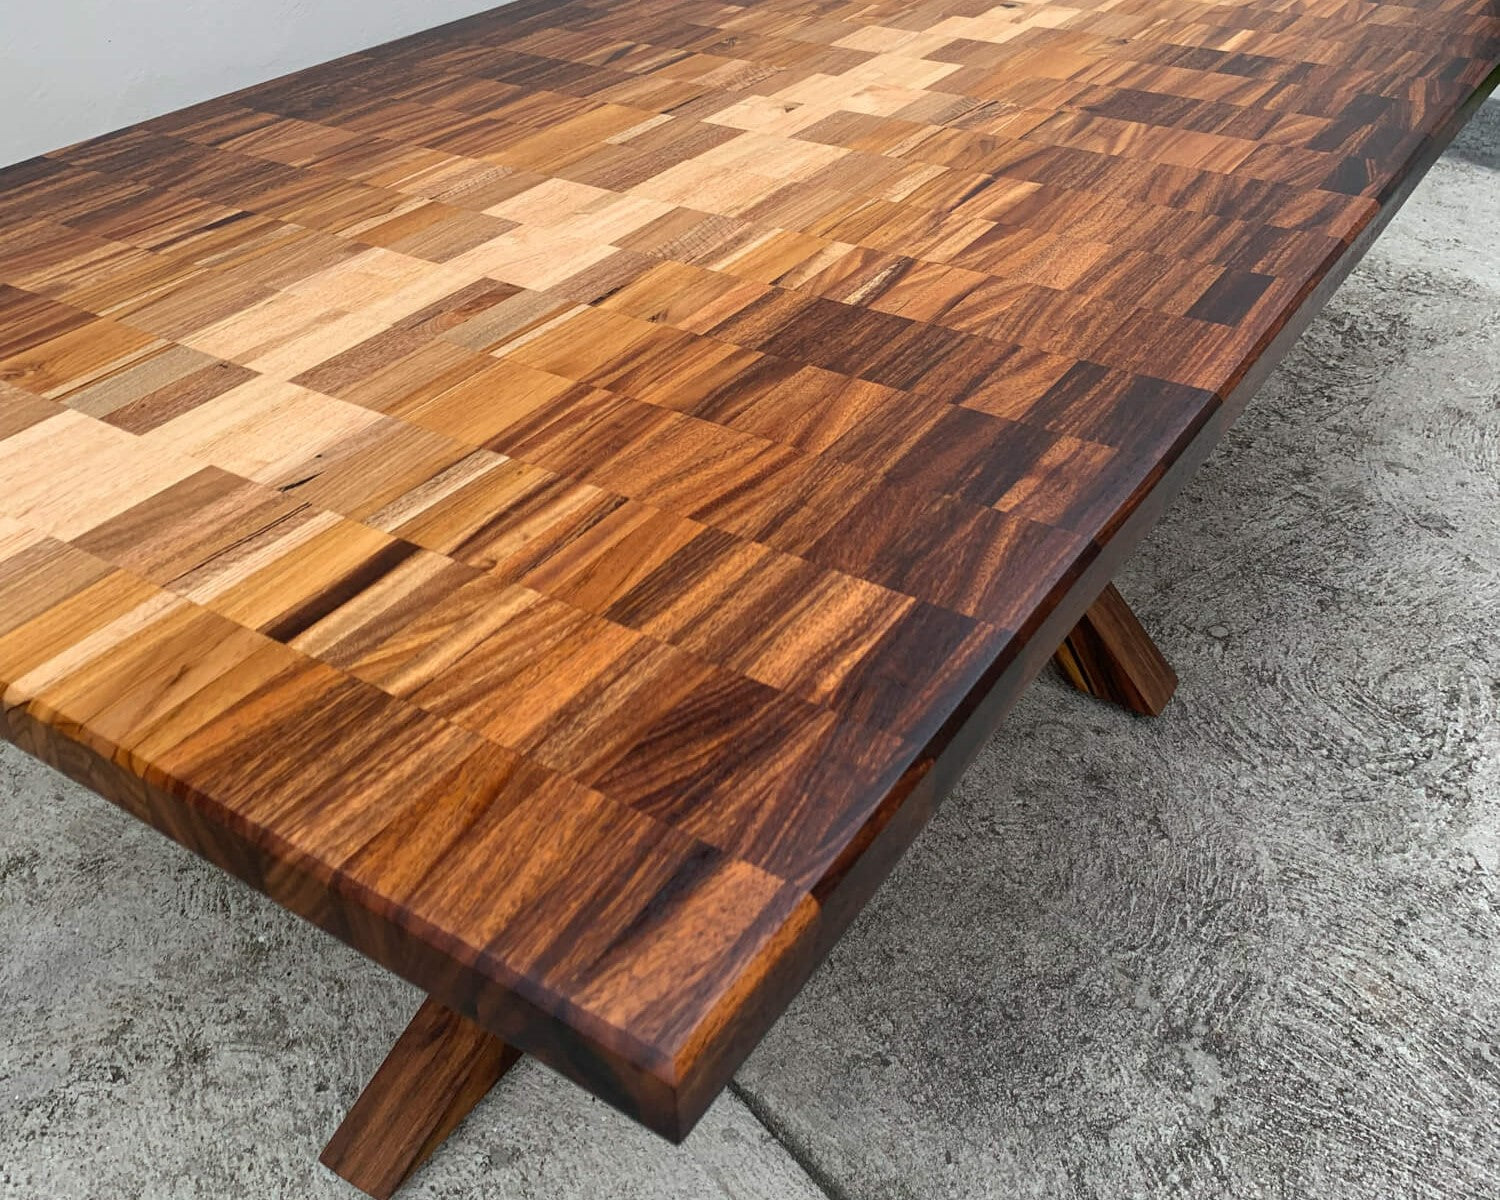 A tabletop made from a variety of different hardwood species arranged in an ombré pattern.